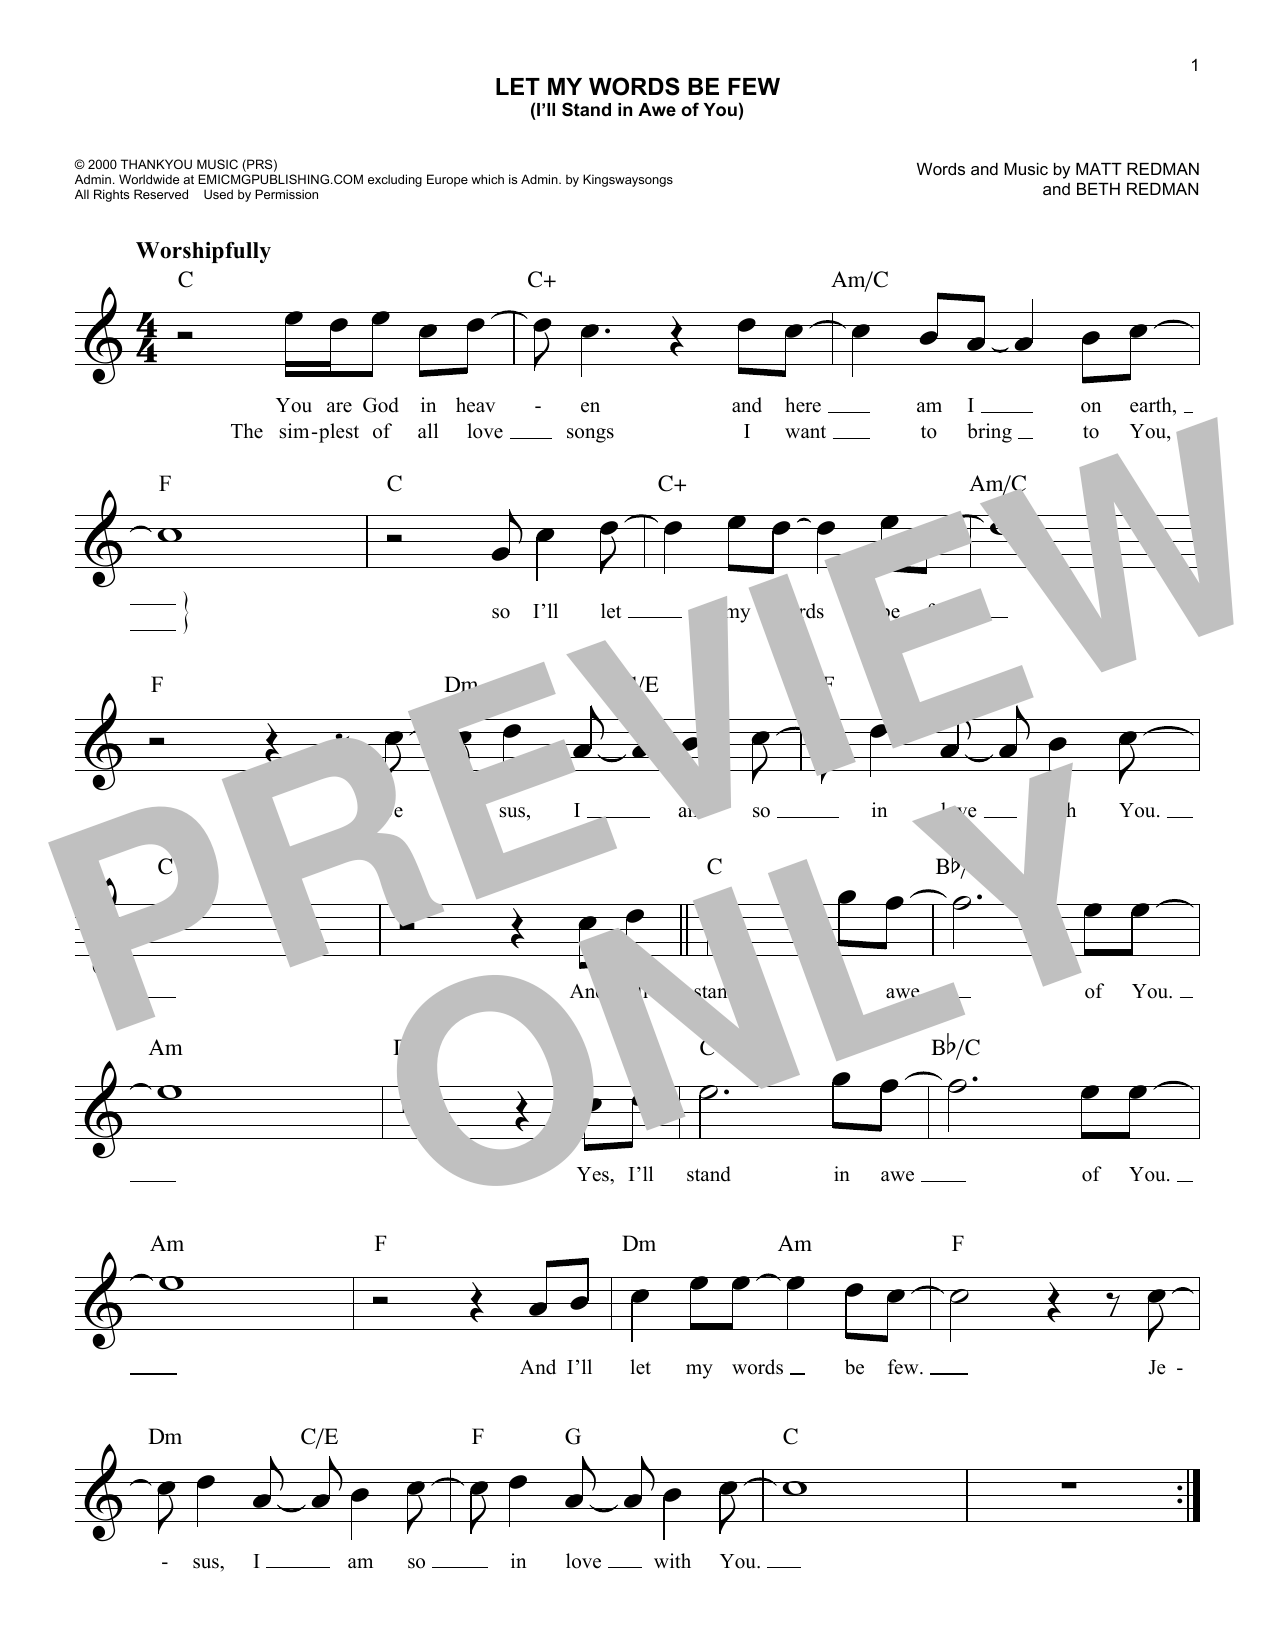 Download Matt Redman Let My Words Be Few (You Are God In Hea Sheet Music